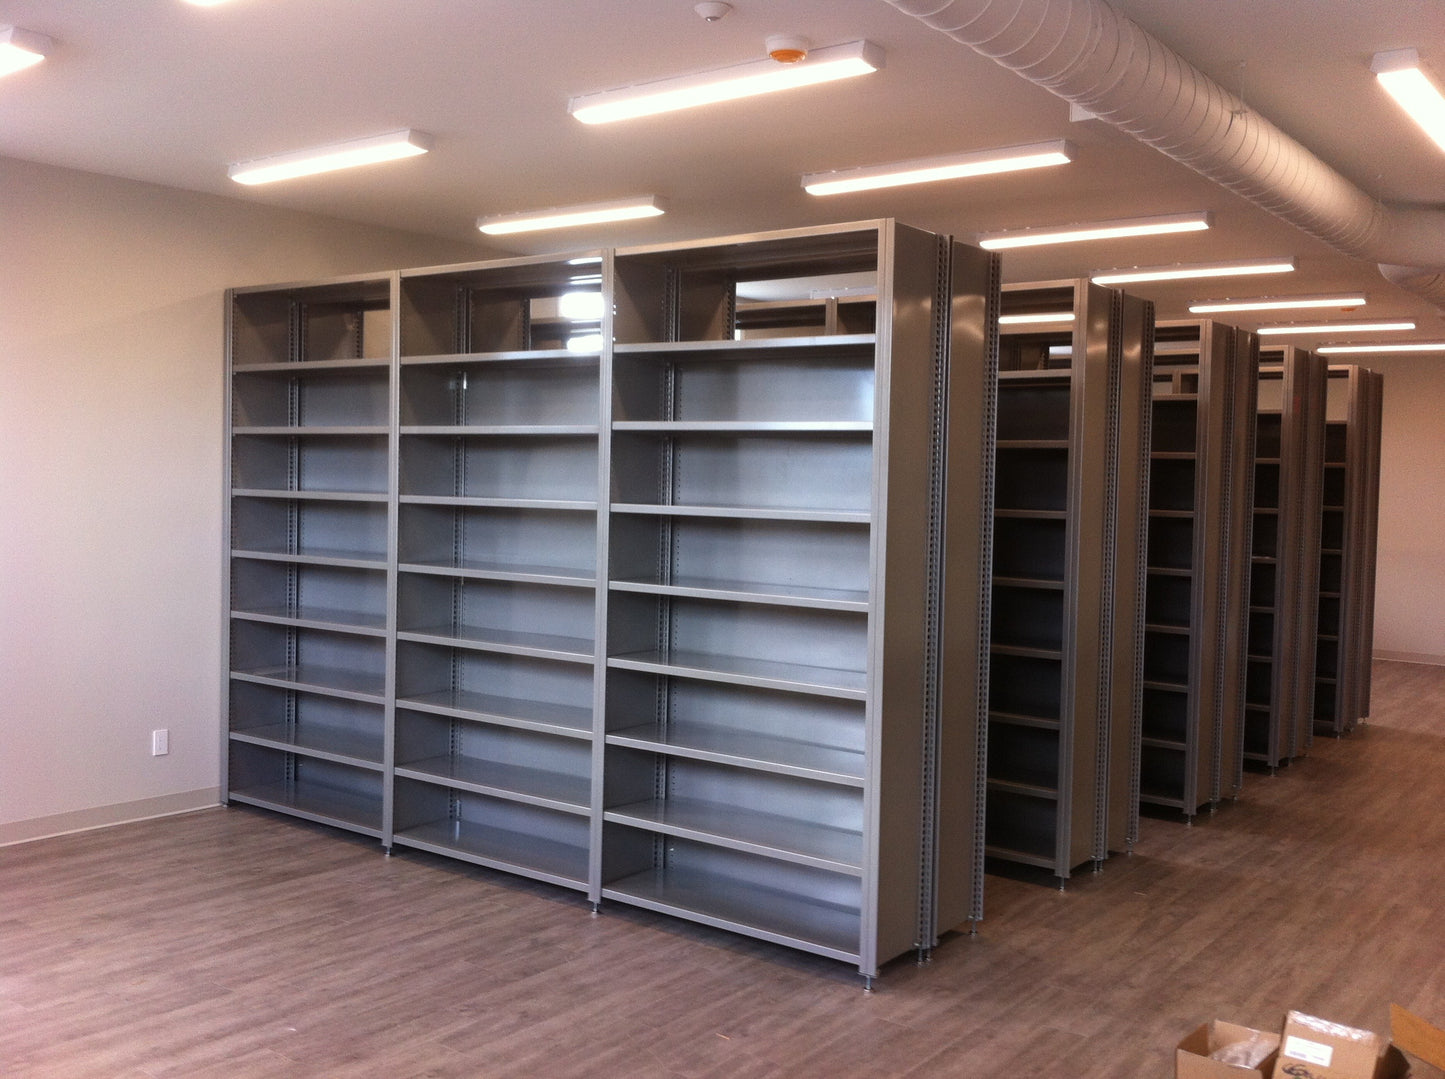 Shelving system 99 height x 48 width x 24 depth | Option: Open / Closed